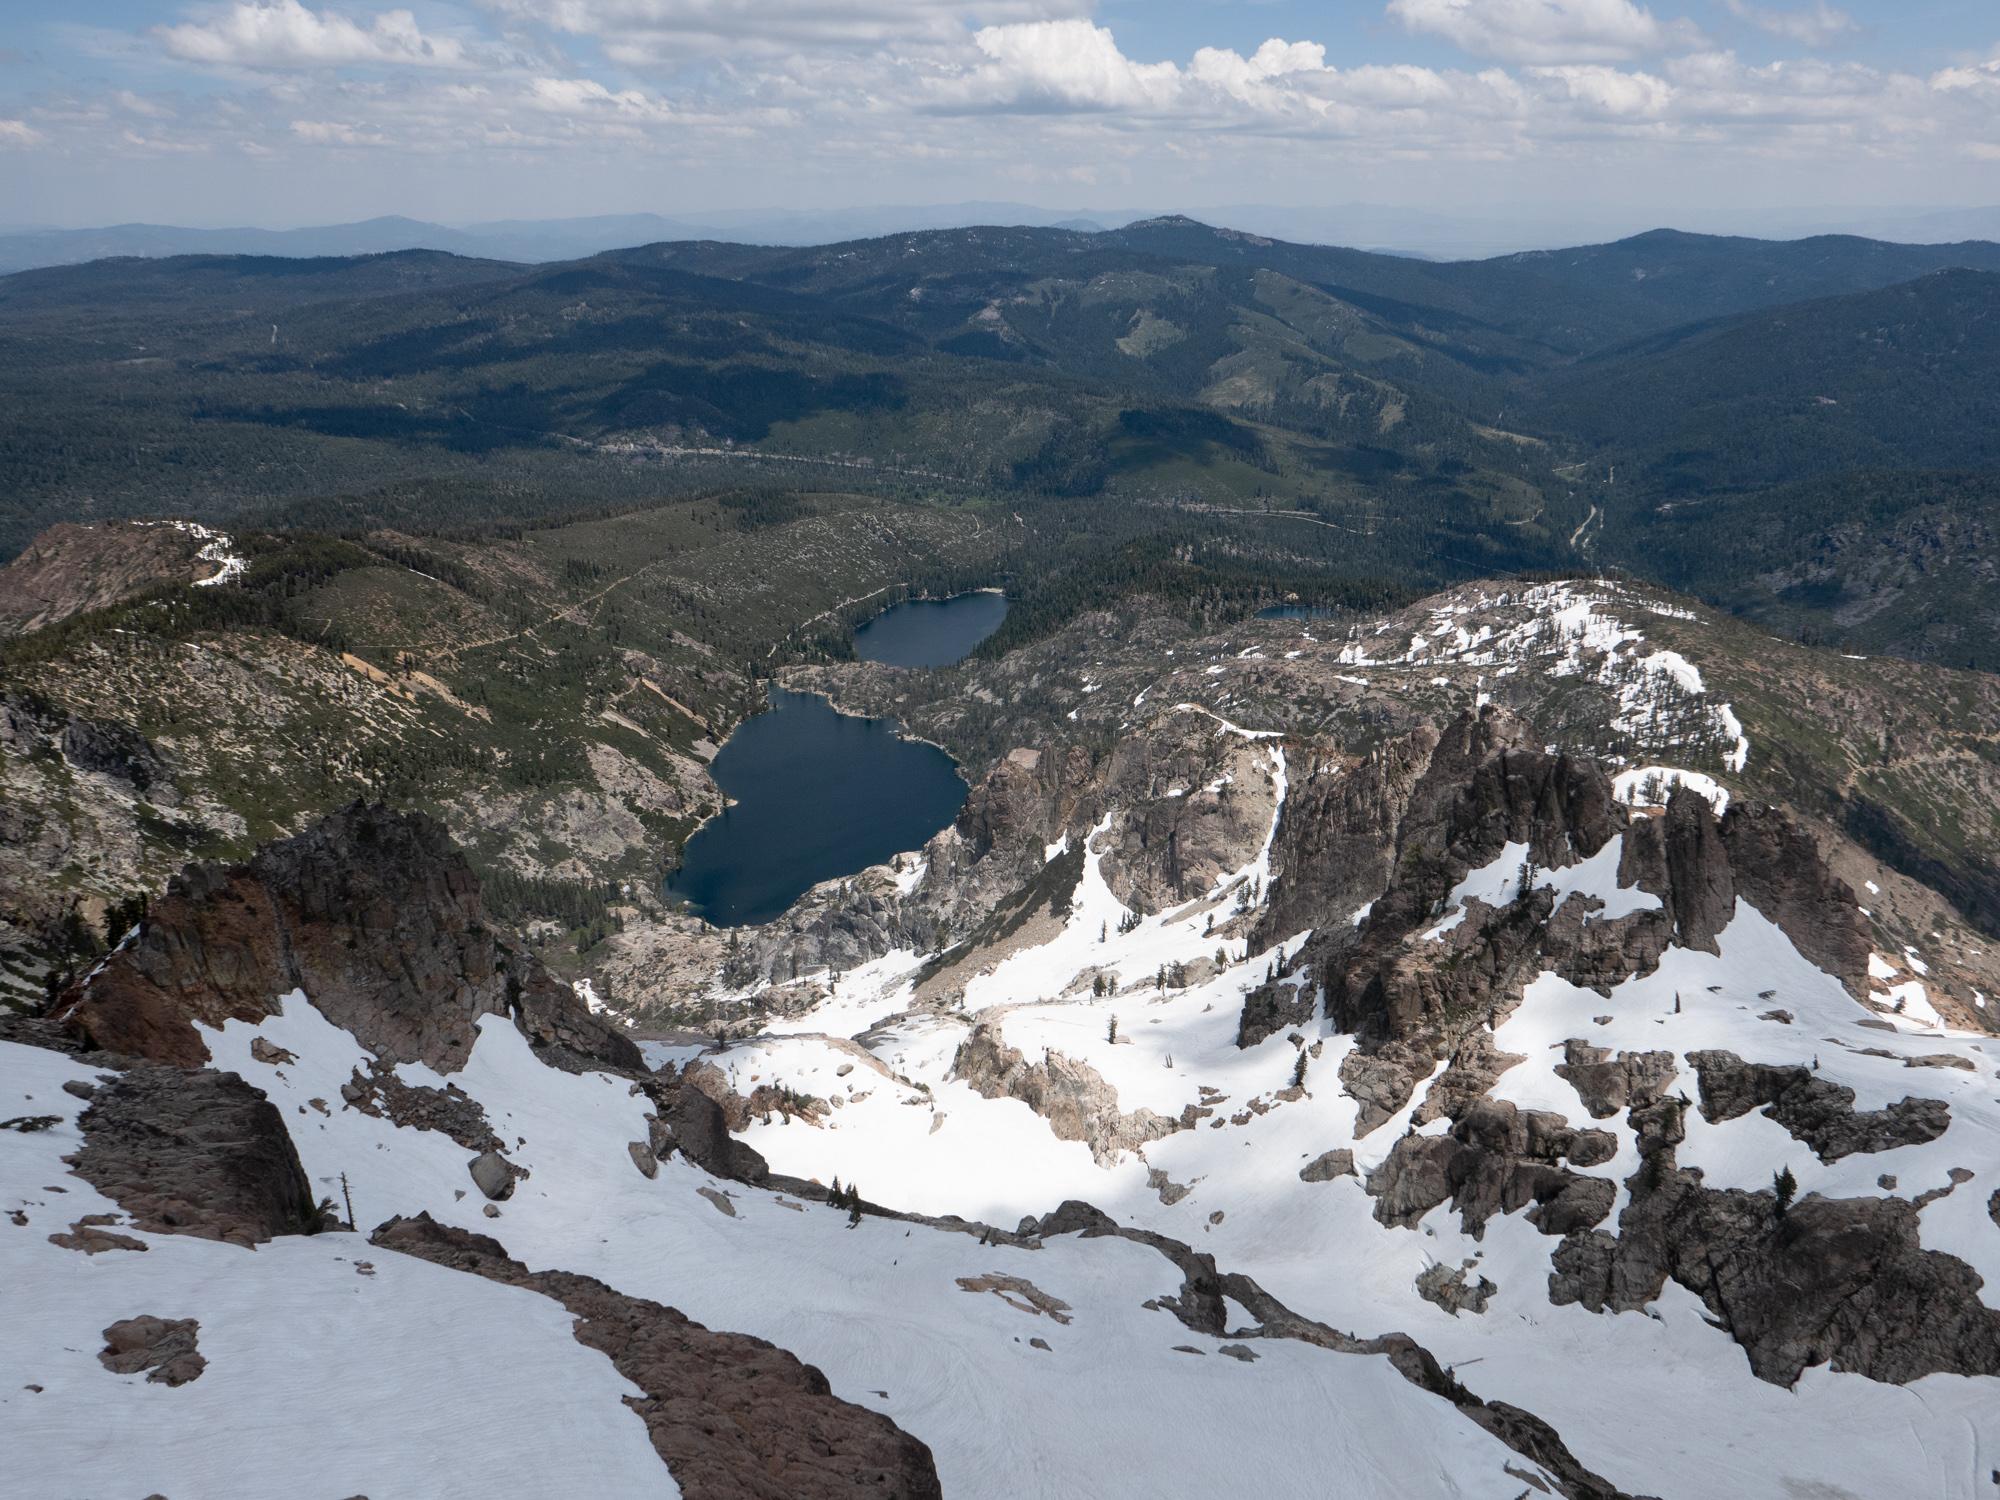 Upper and Lower Sardine lakes as seen from the lookout